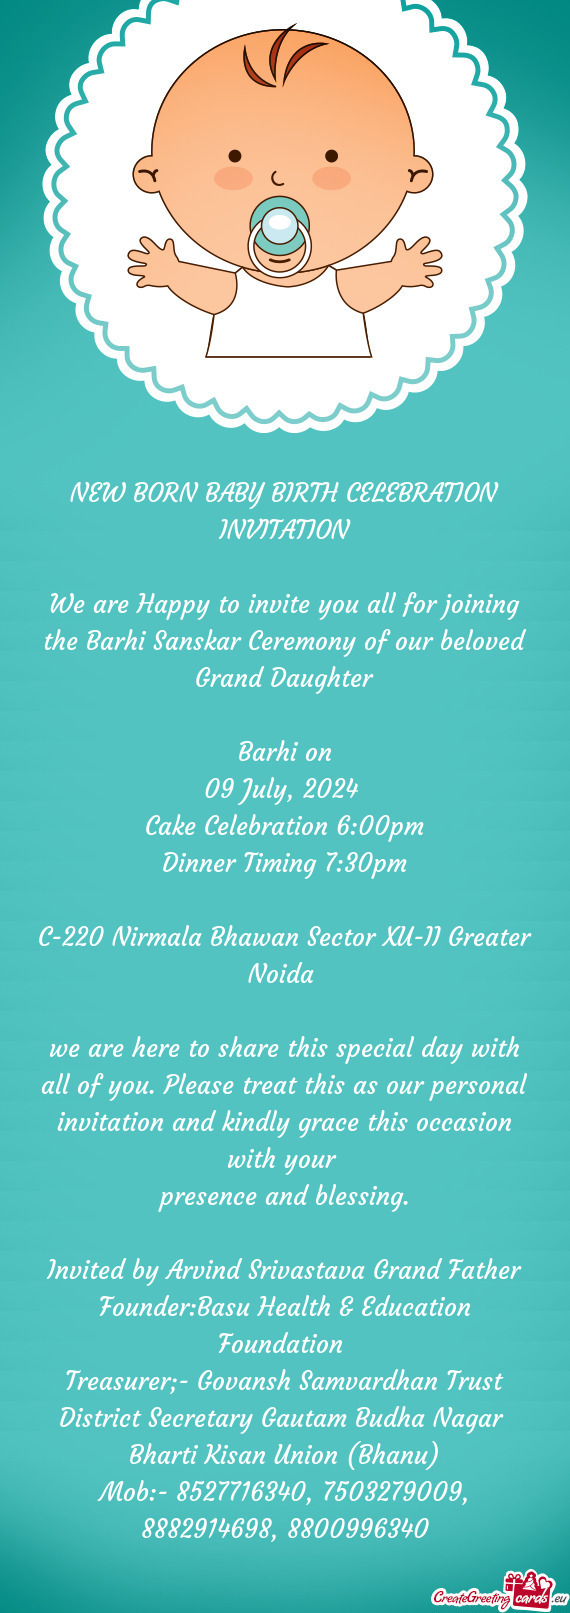 We are Happy to invite you all for joining the Barhi Sanskar Ceremony of our beloved Grand Daughter